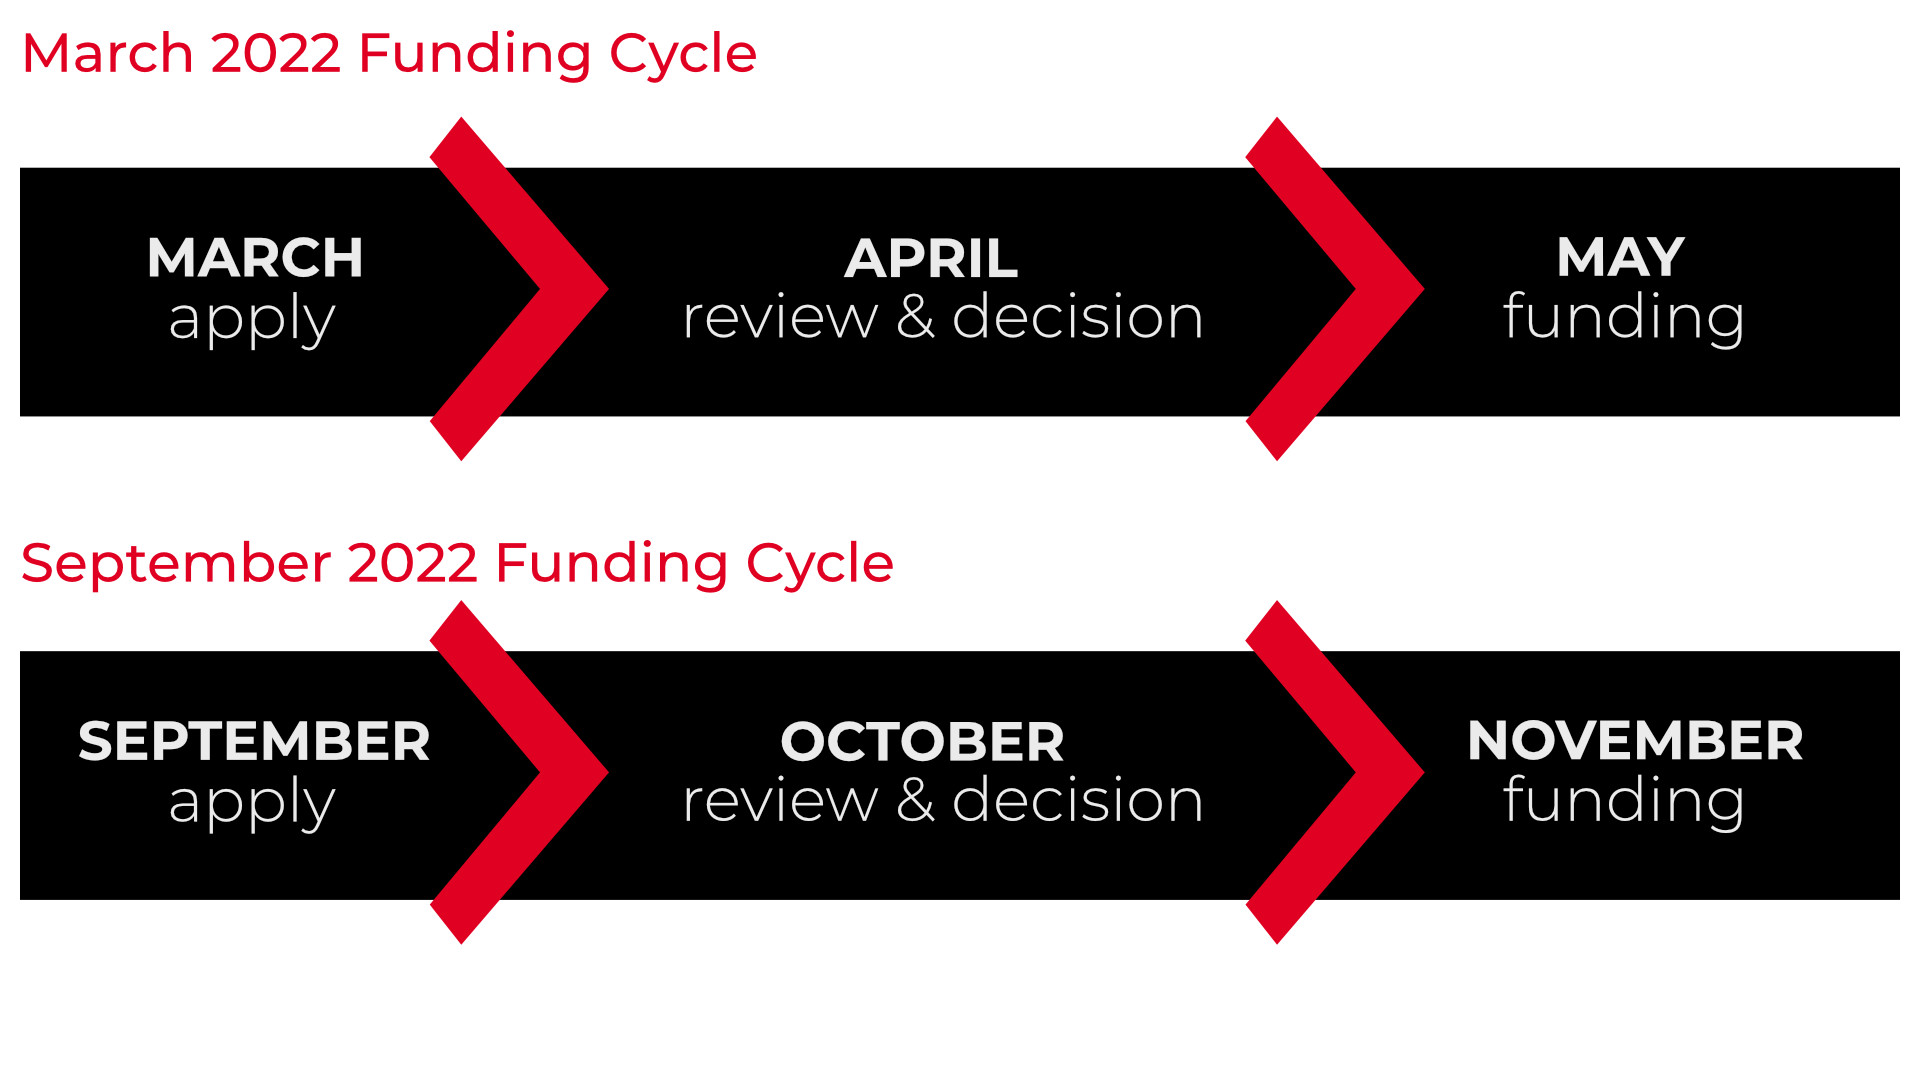 Spring and Fall Pilot Funding Timeline